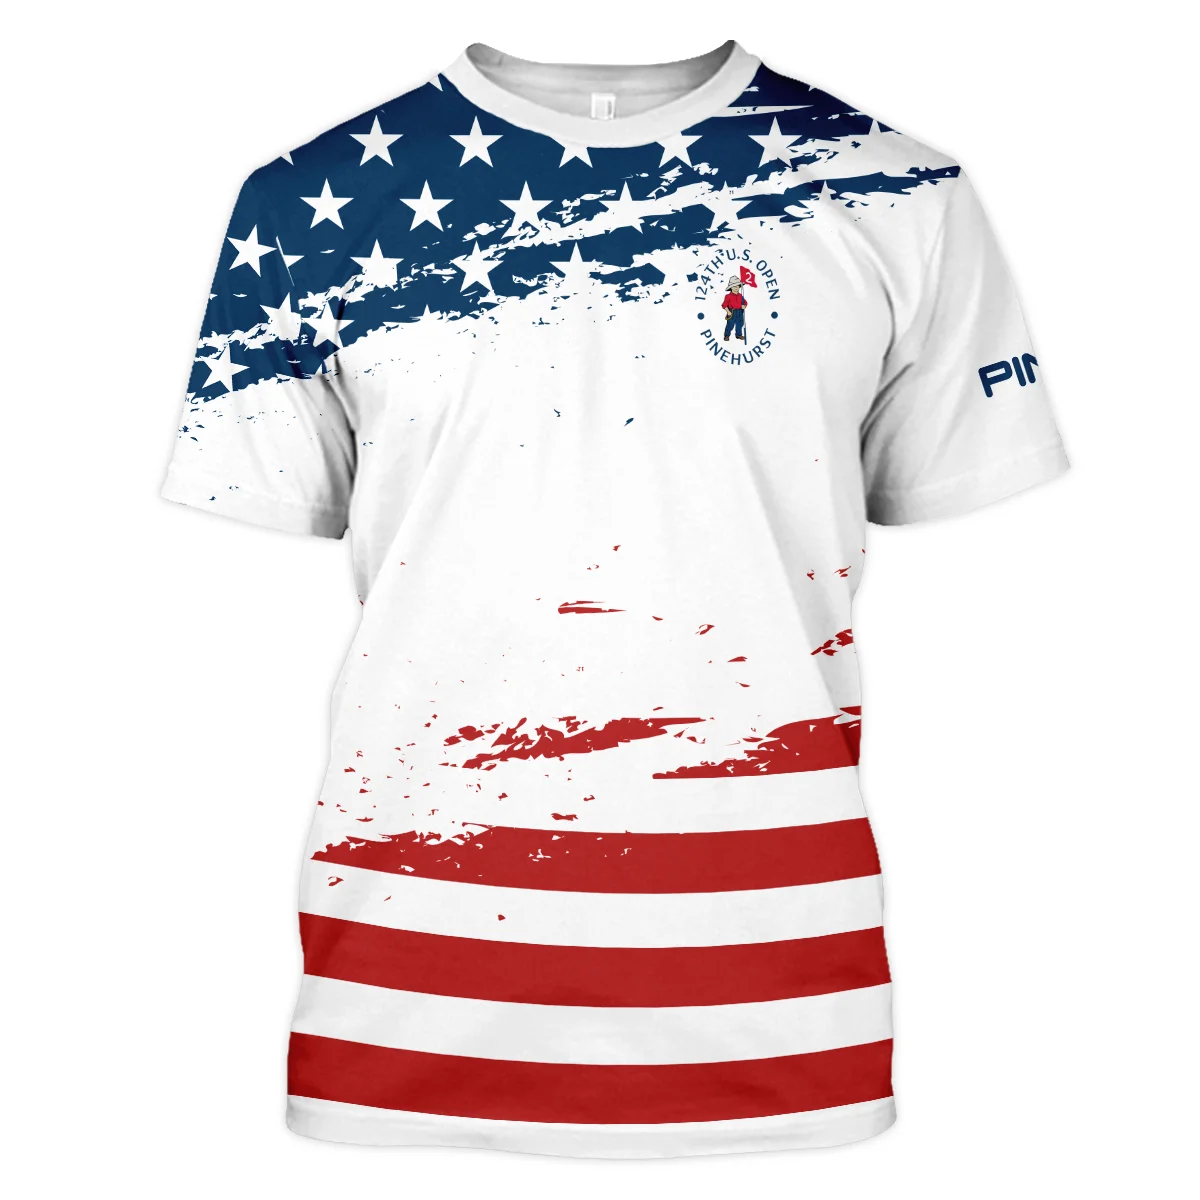 124th U.S. Open Pinehurst Special Version Ping Unisex T-Shirt Blue Red White Color T-Shirt